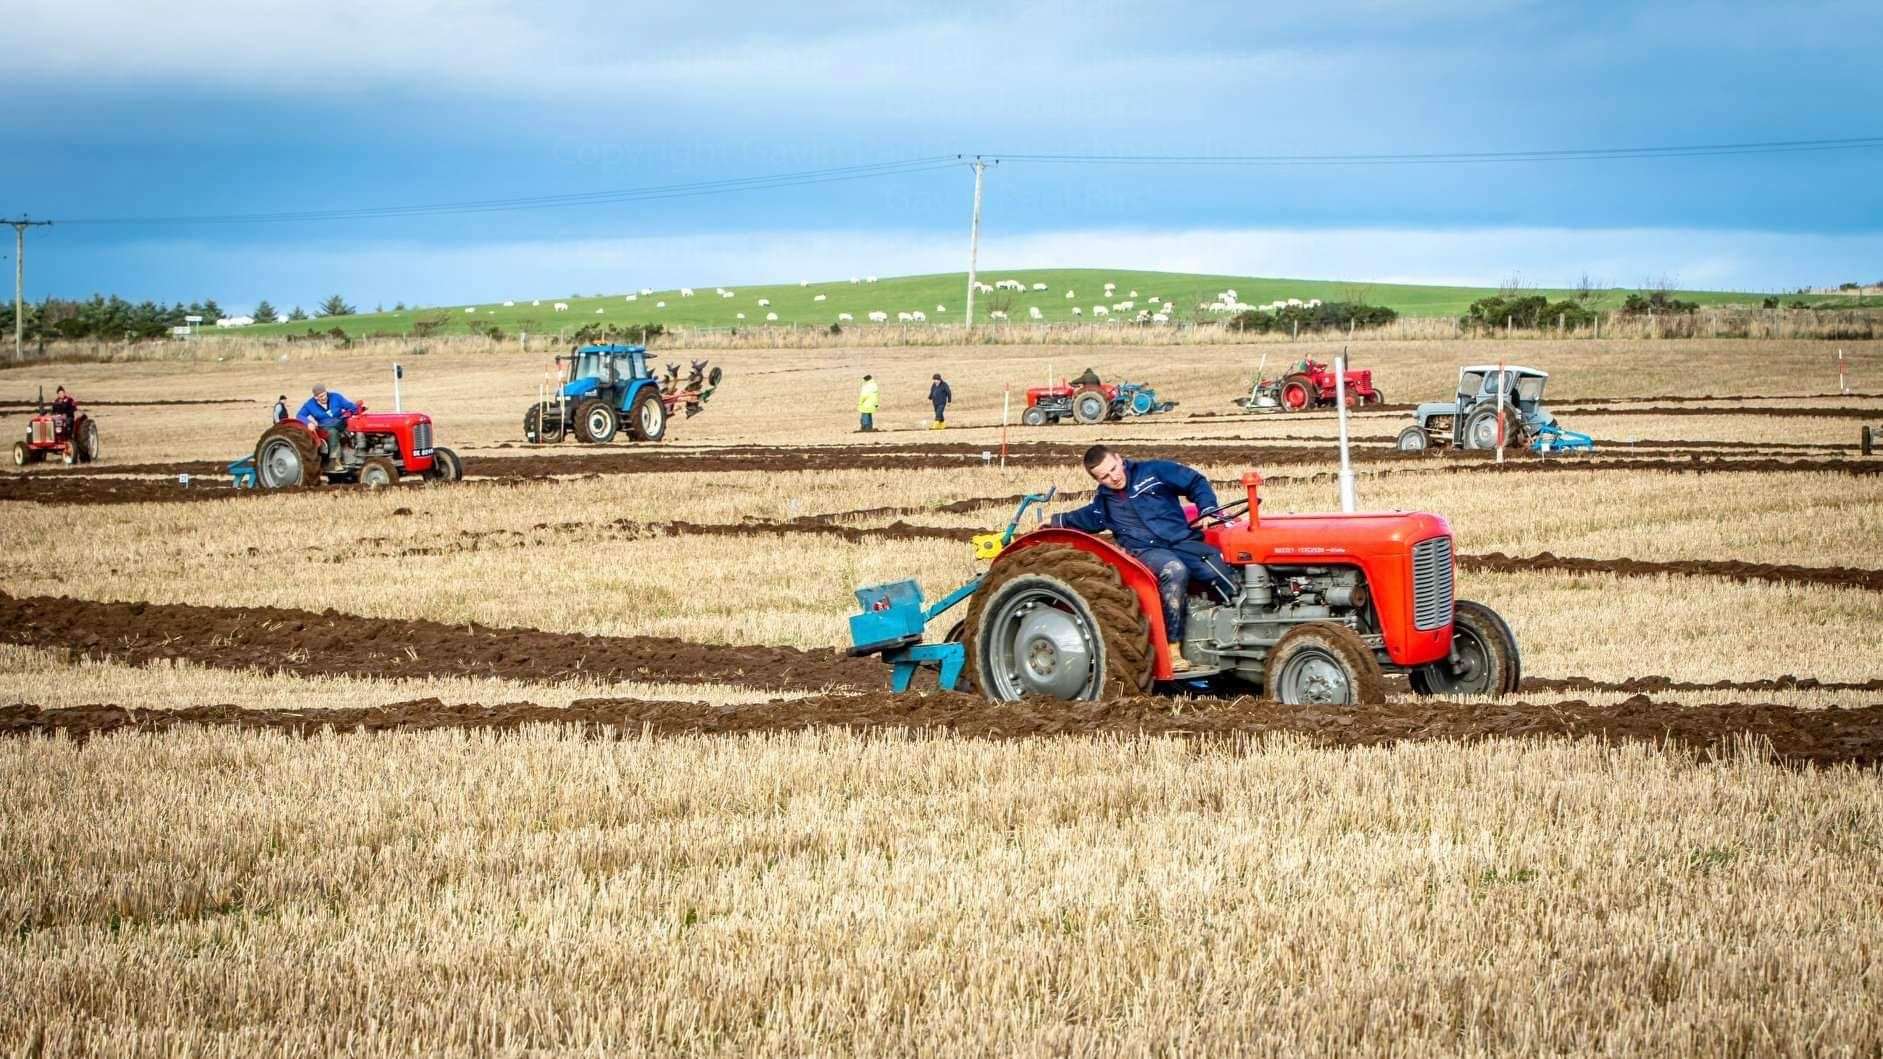 The annual charity vintage ploughing match had its last outing at Dixonfield Farm near Thurso back in 2019. Picture: Robert Macdonald